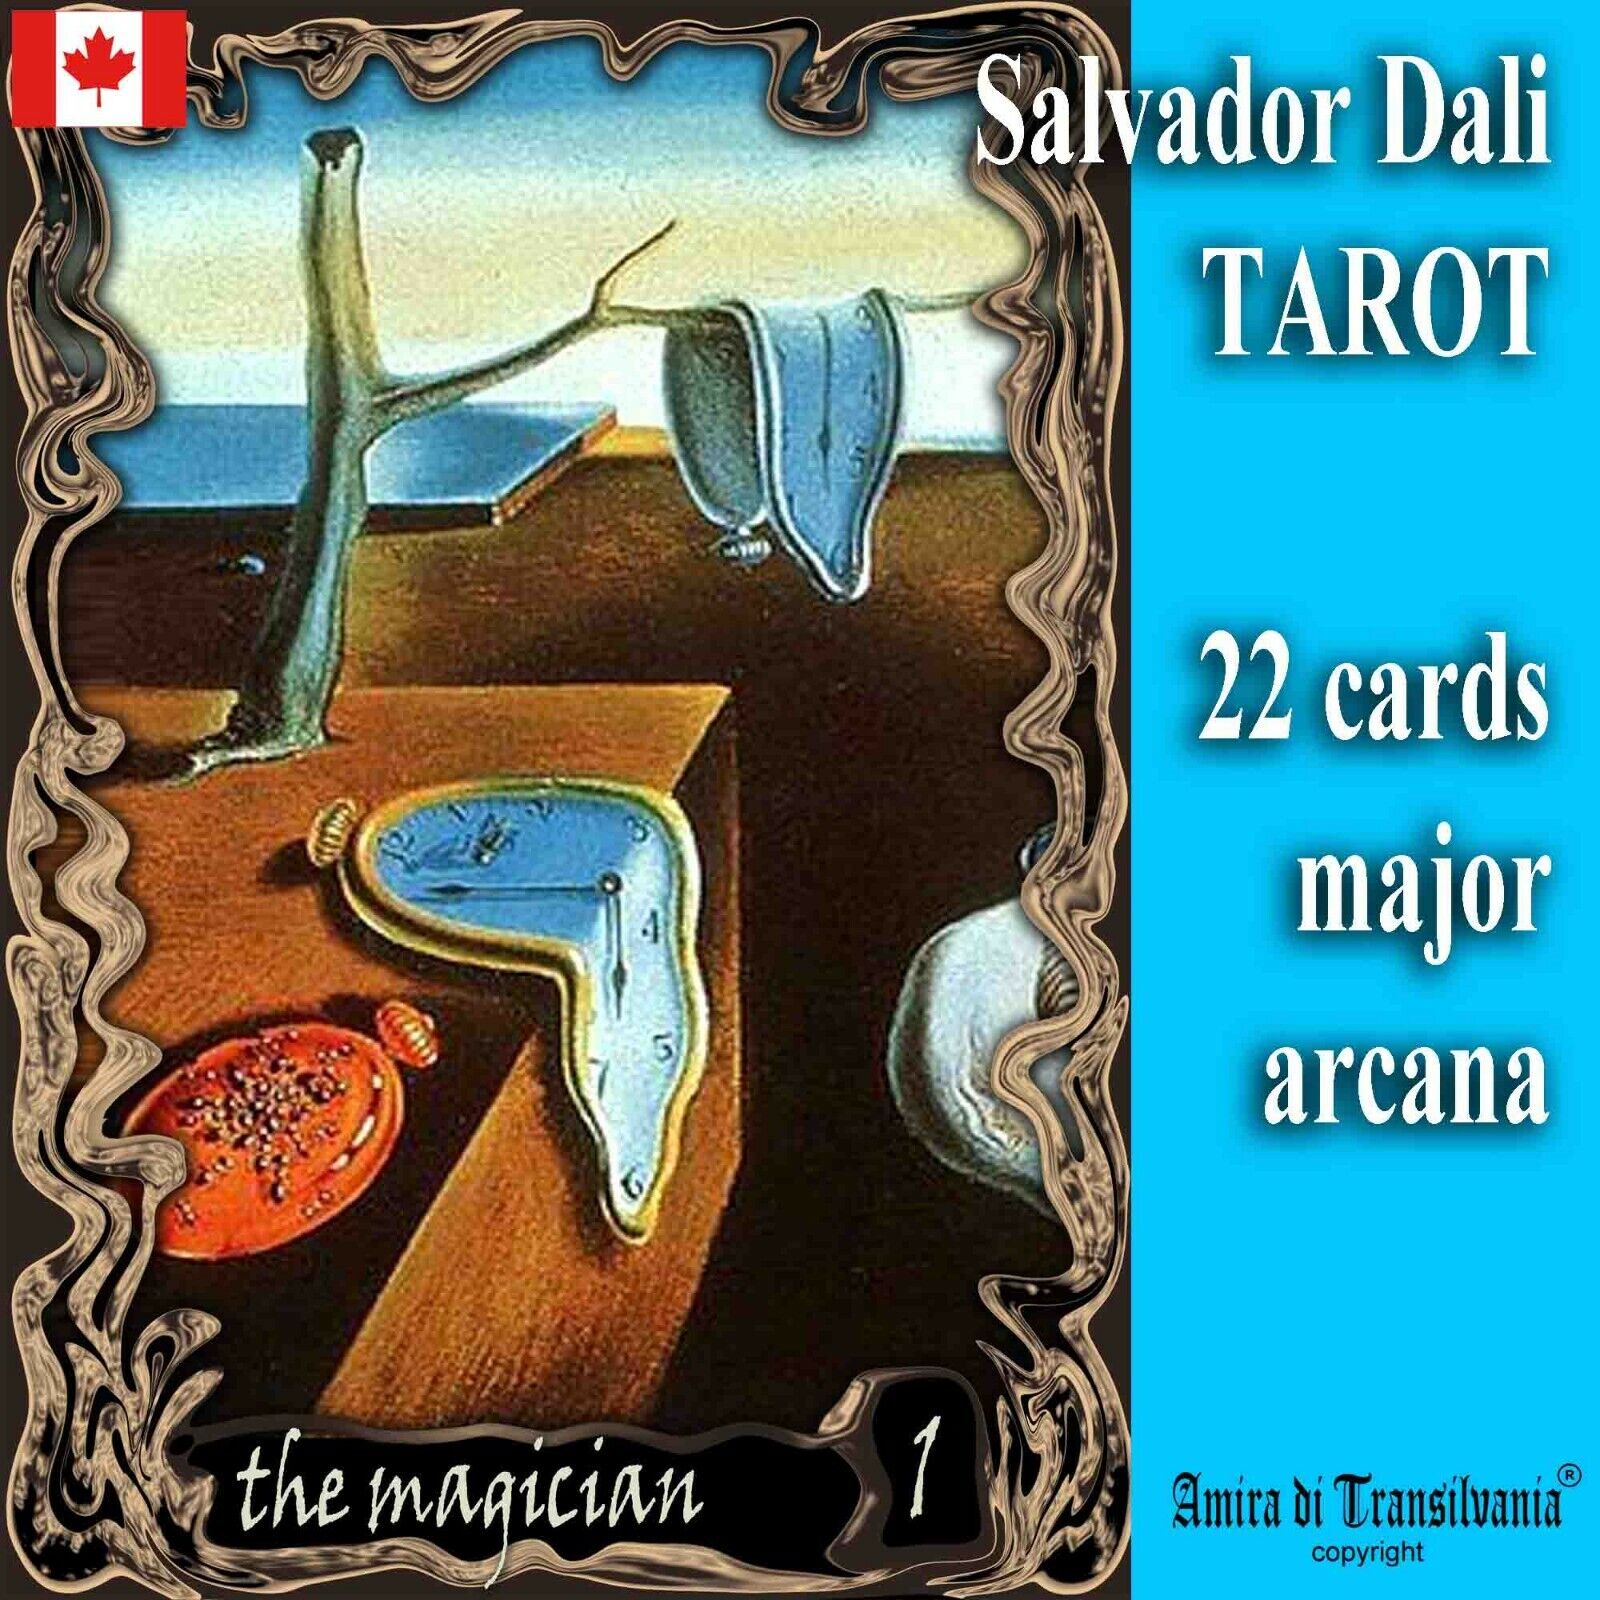 salvador dali art tarot card cards deck tell fortune telling rare vintage oracle